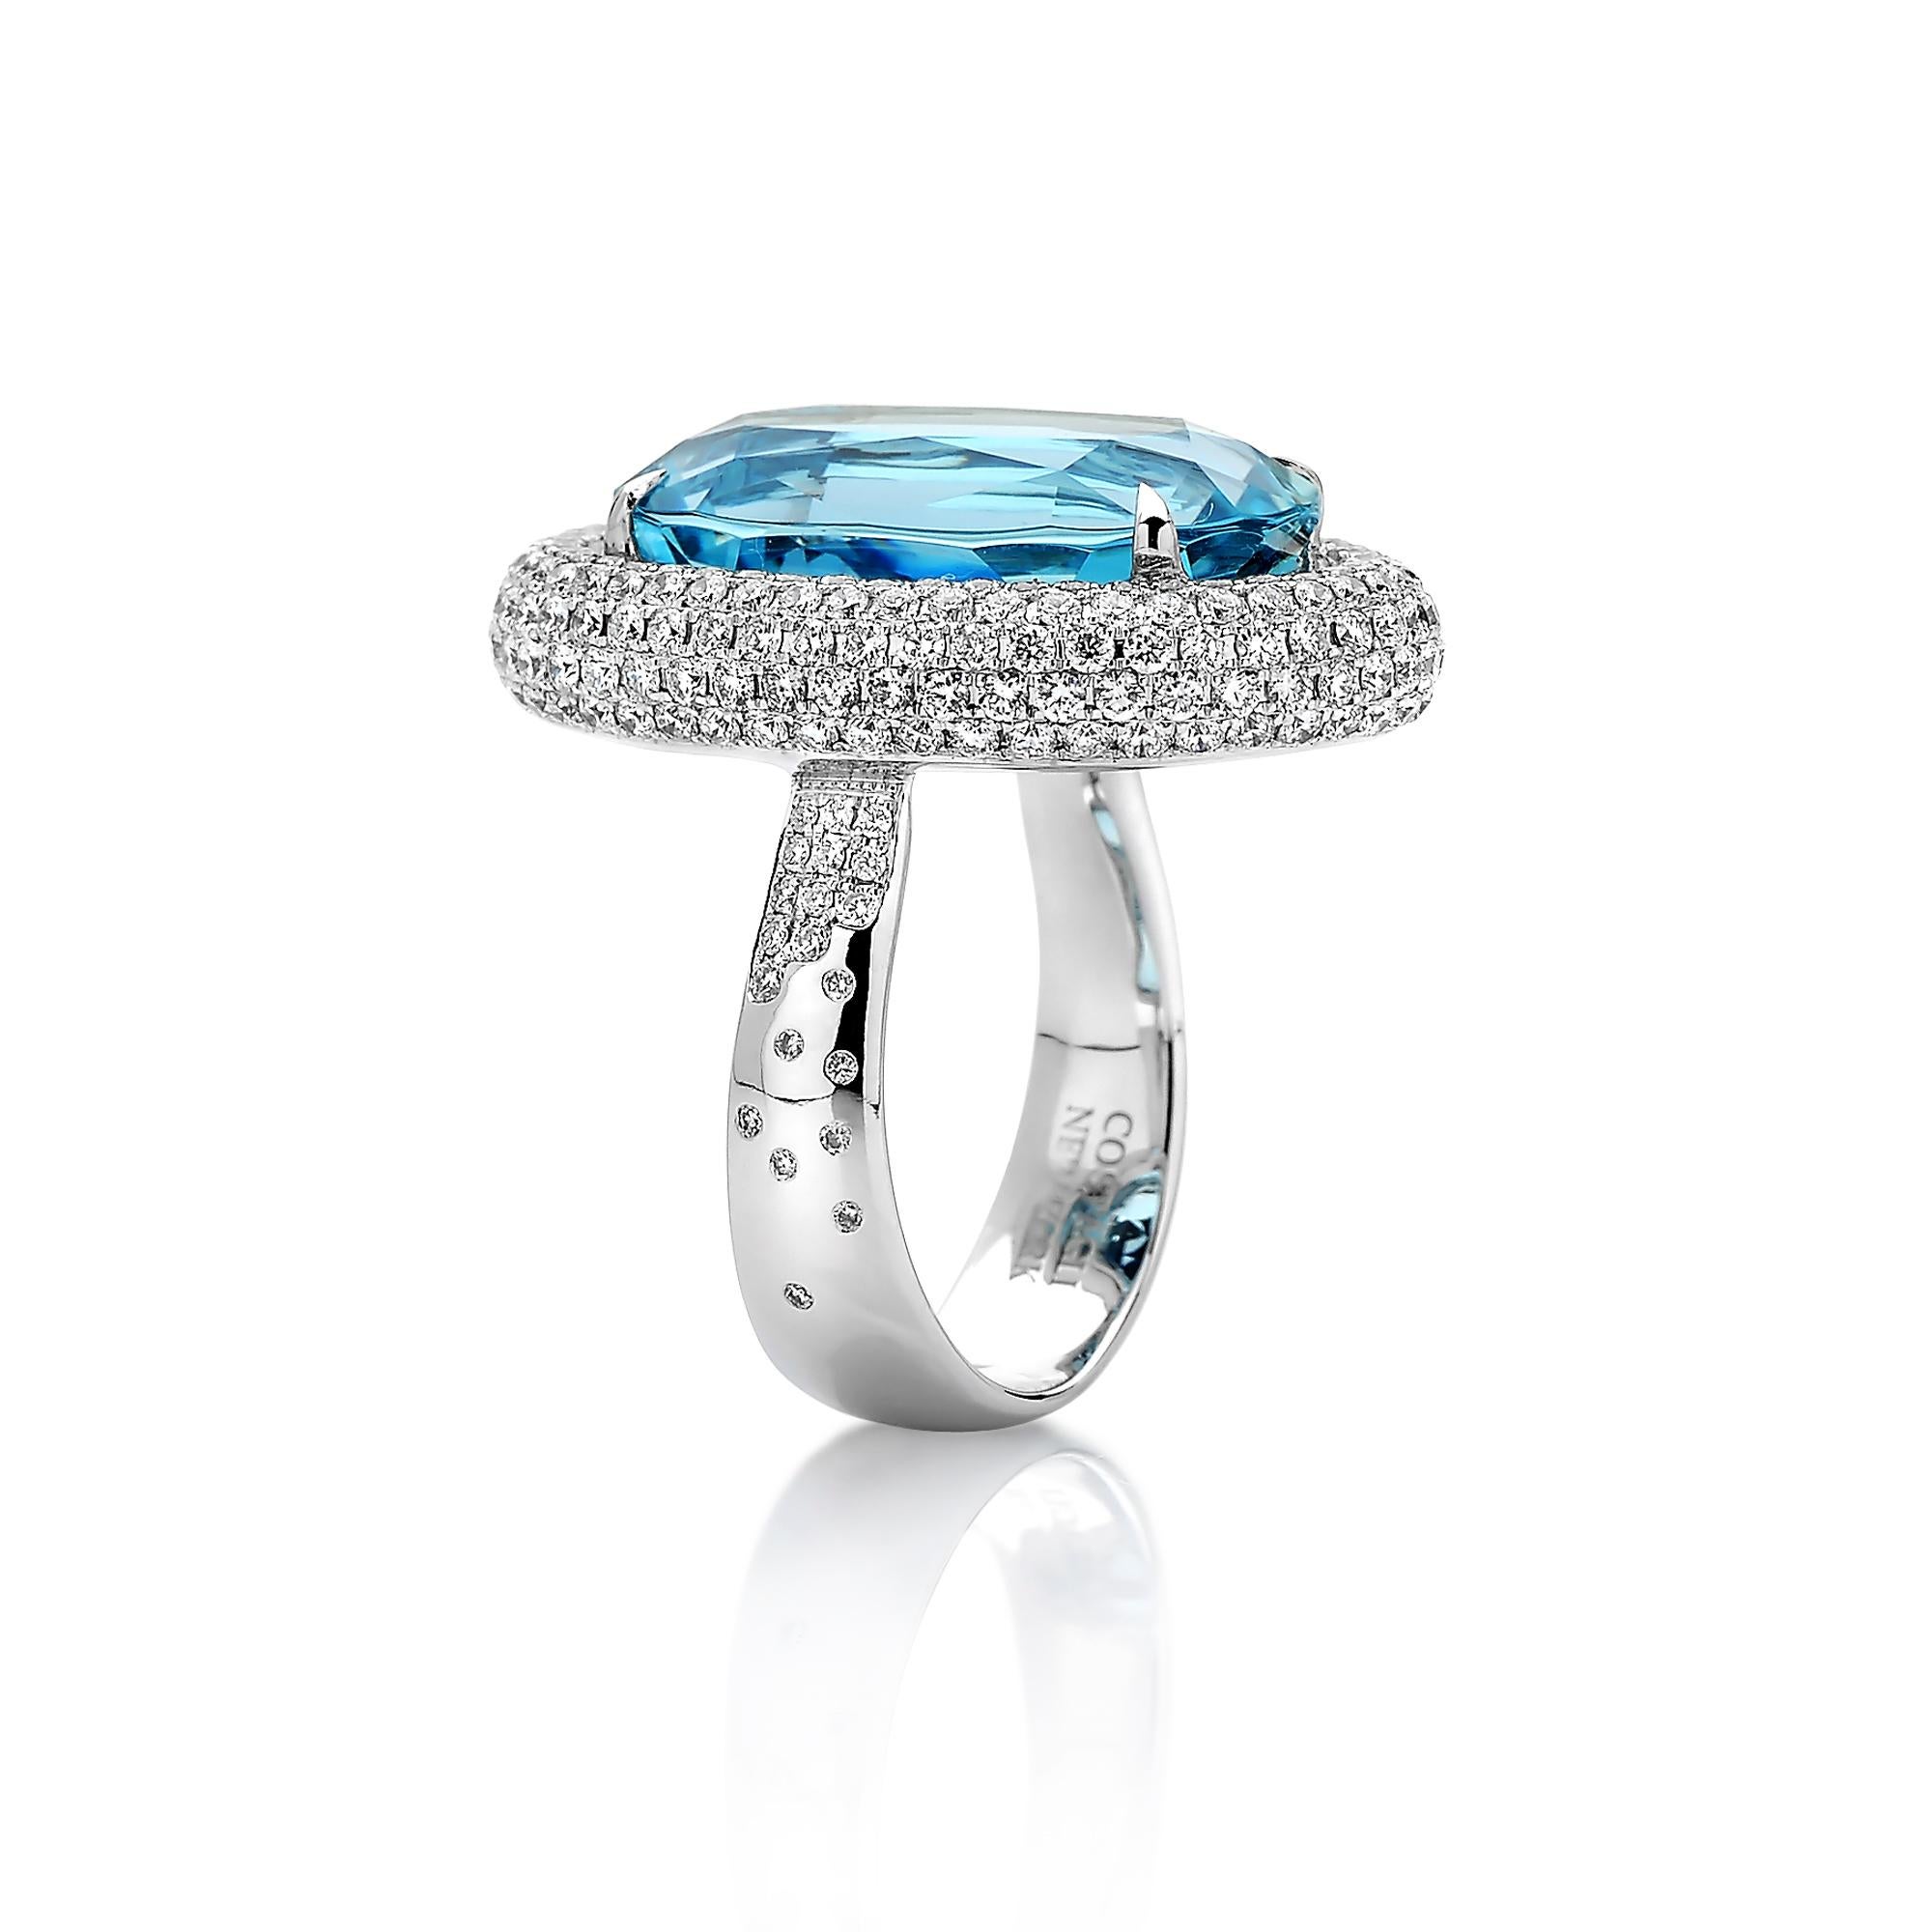 One of a kind 18 karat white gold oval-shape aquamarine ring with pave-set round, brilliant diamonds. 

The beauty is in the details - from the combination of hues, the cut of the gemstones, and the color of gold in the mountings, every element is